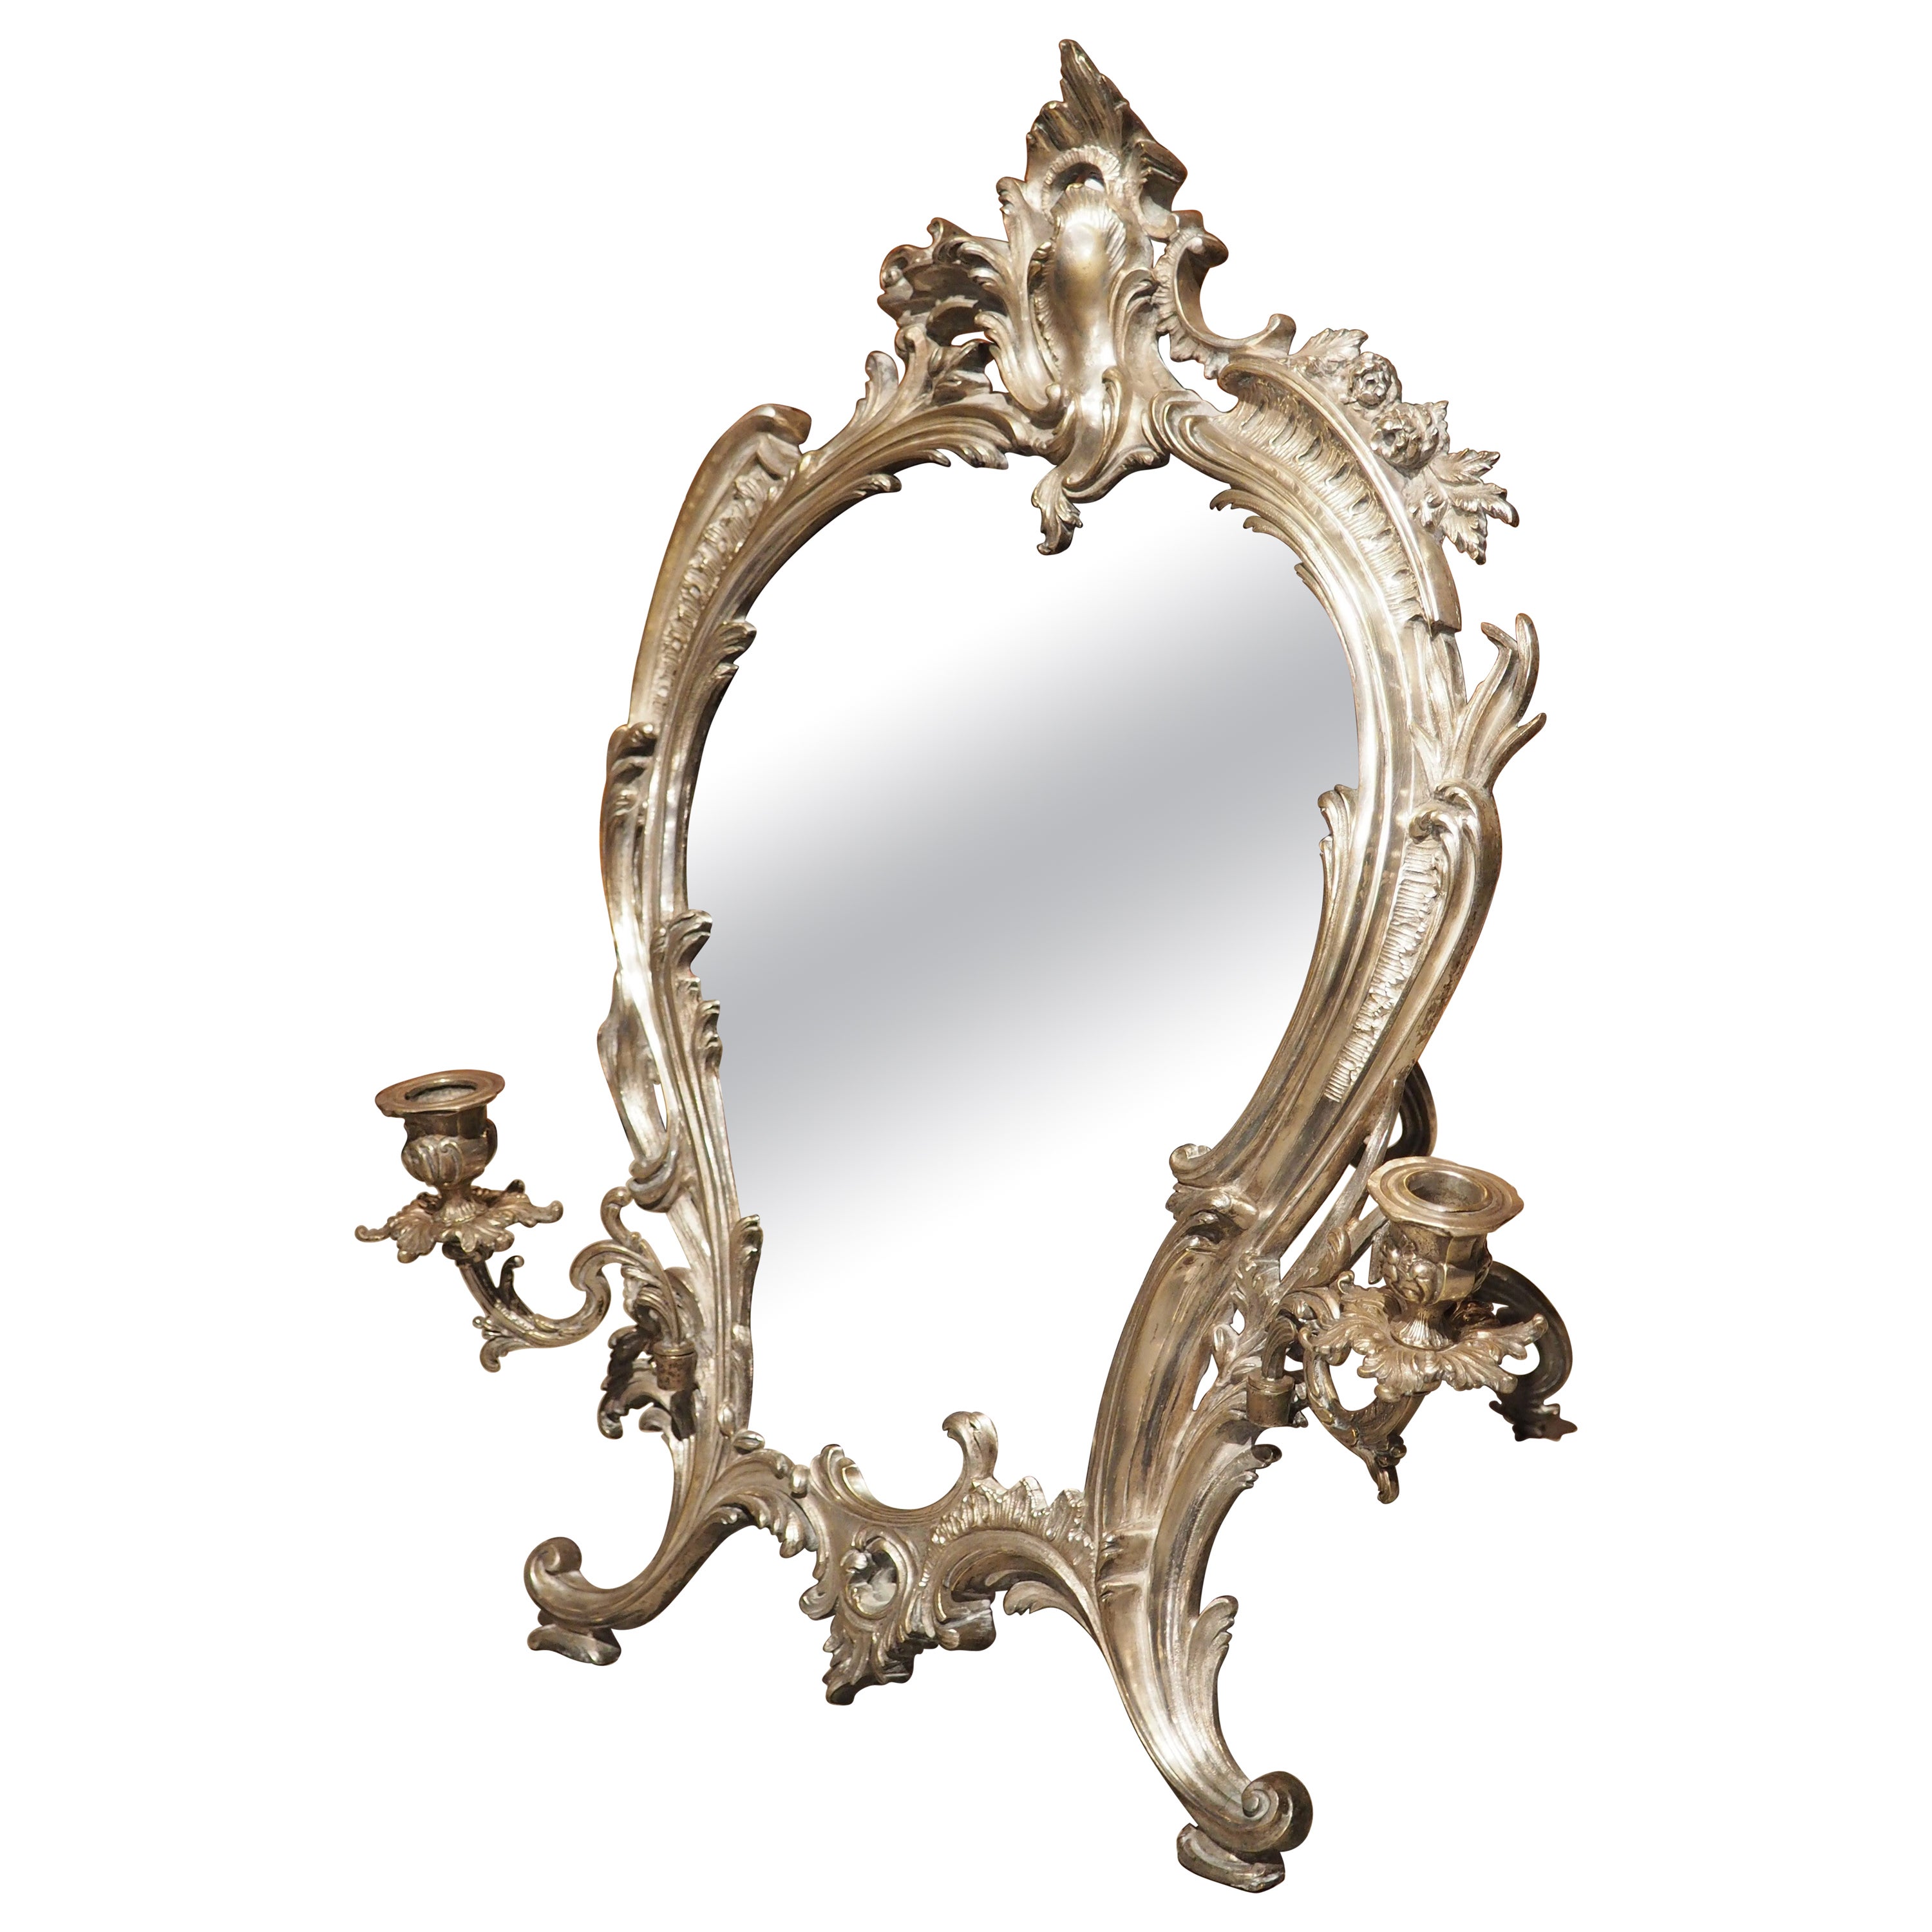 Antique French Silvered Bronze Table Mirror with Candle Holders, Circa 1850 For Sale